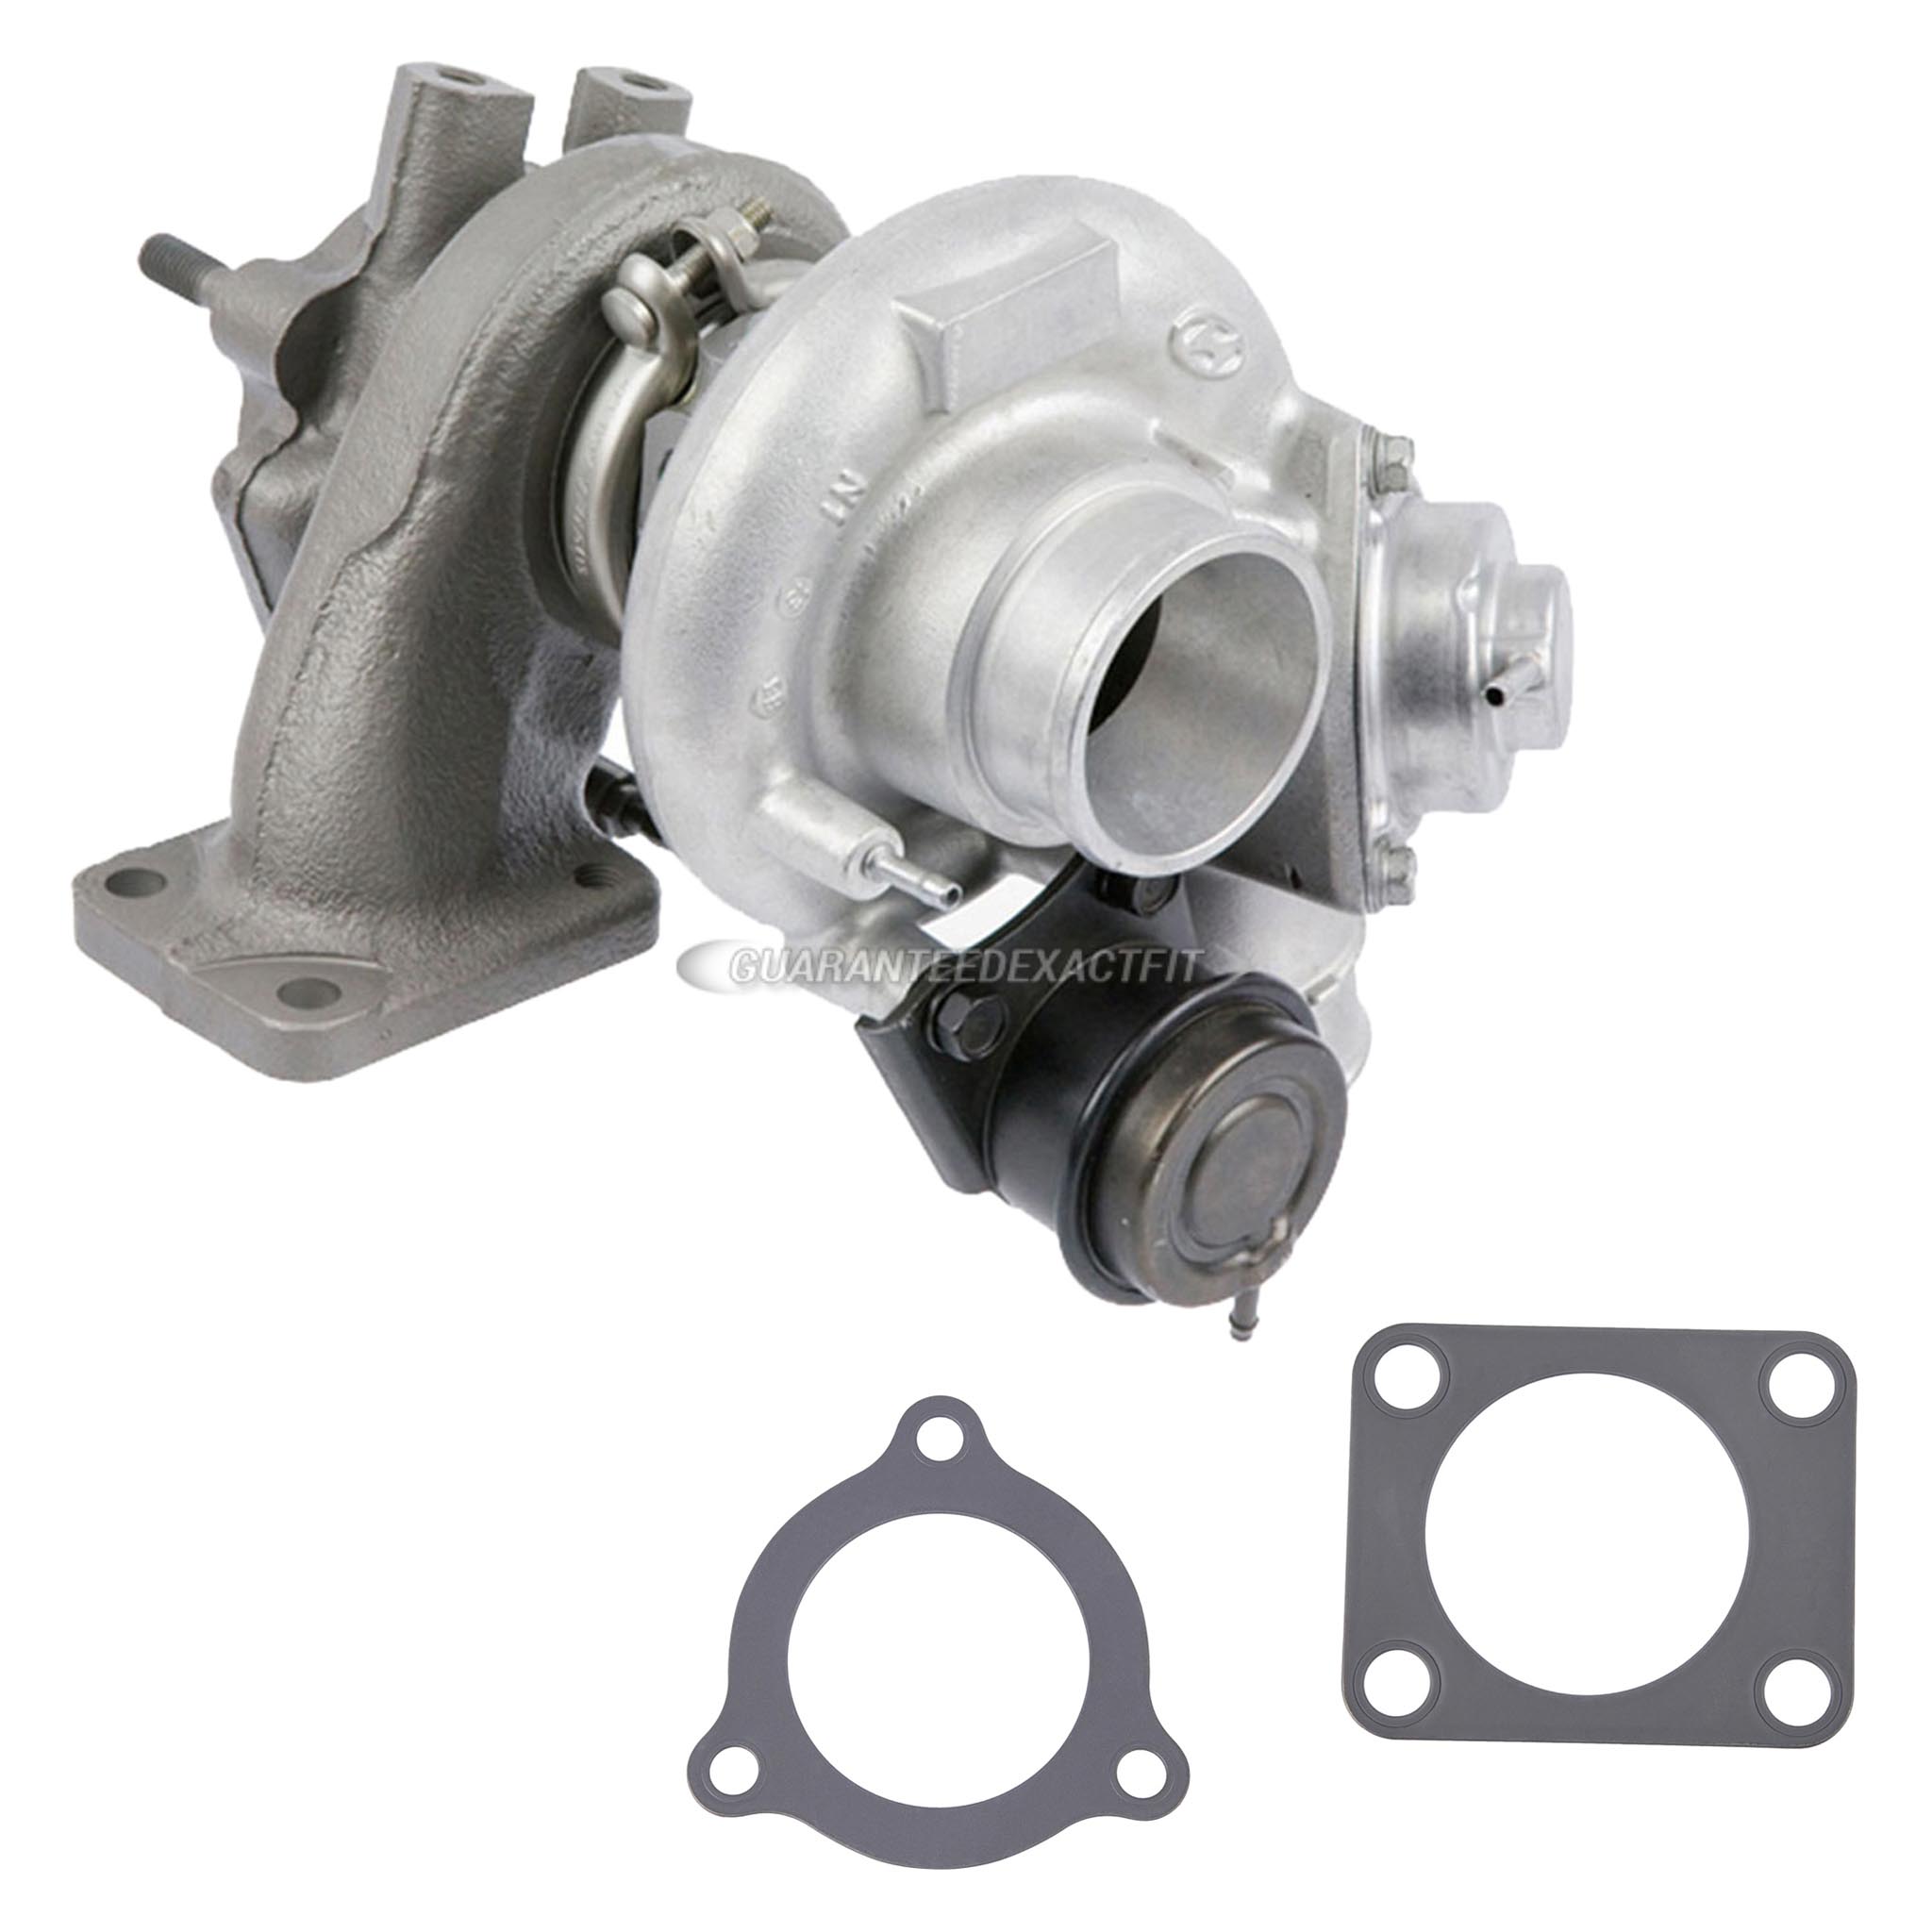 2010 Hyundai Genesis Coupe turbocharger and installation accessory kit 